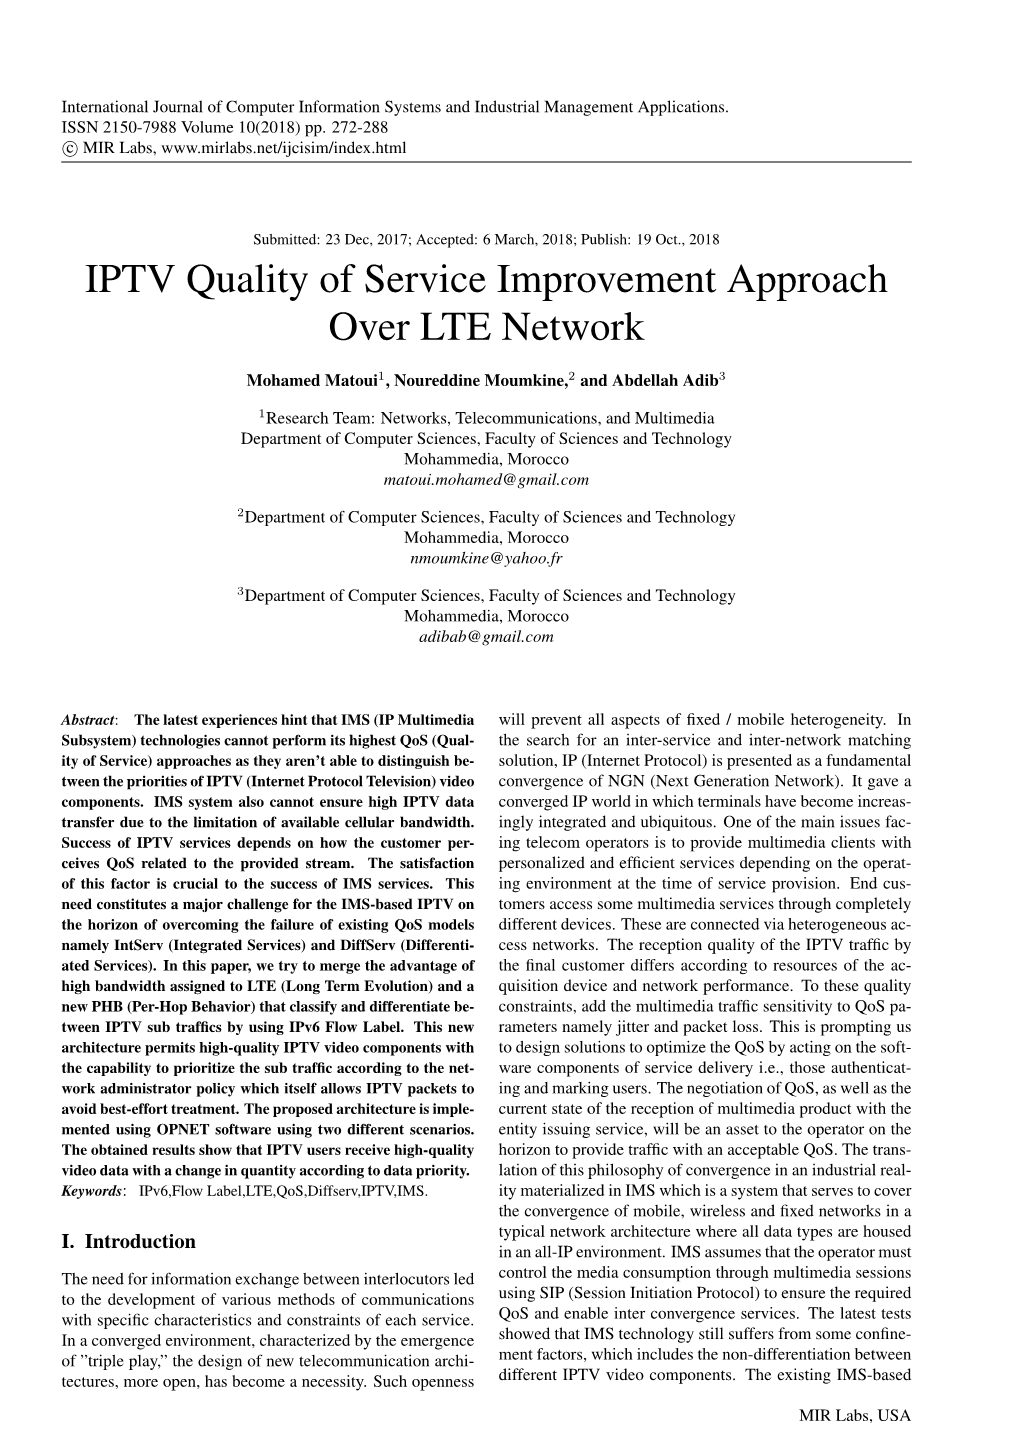 IPTV Quality of Service Improvement Approach Over LTE Network